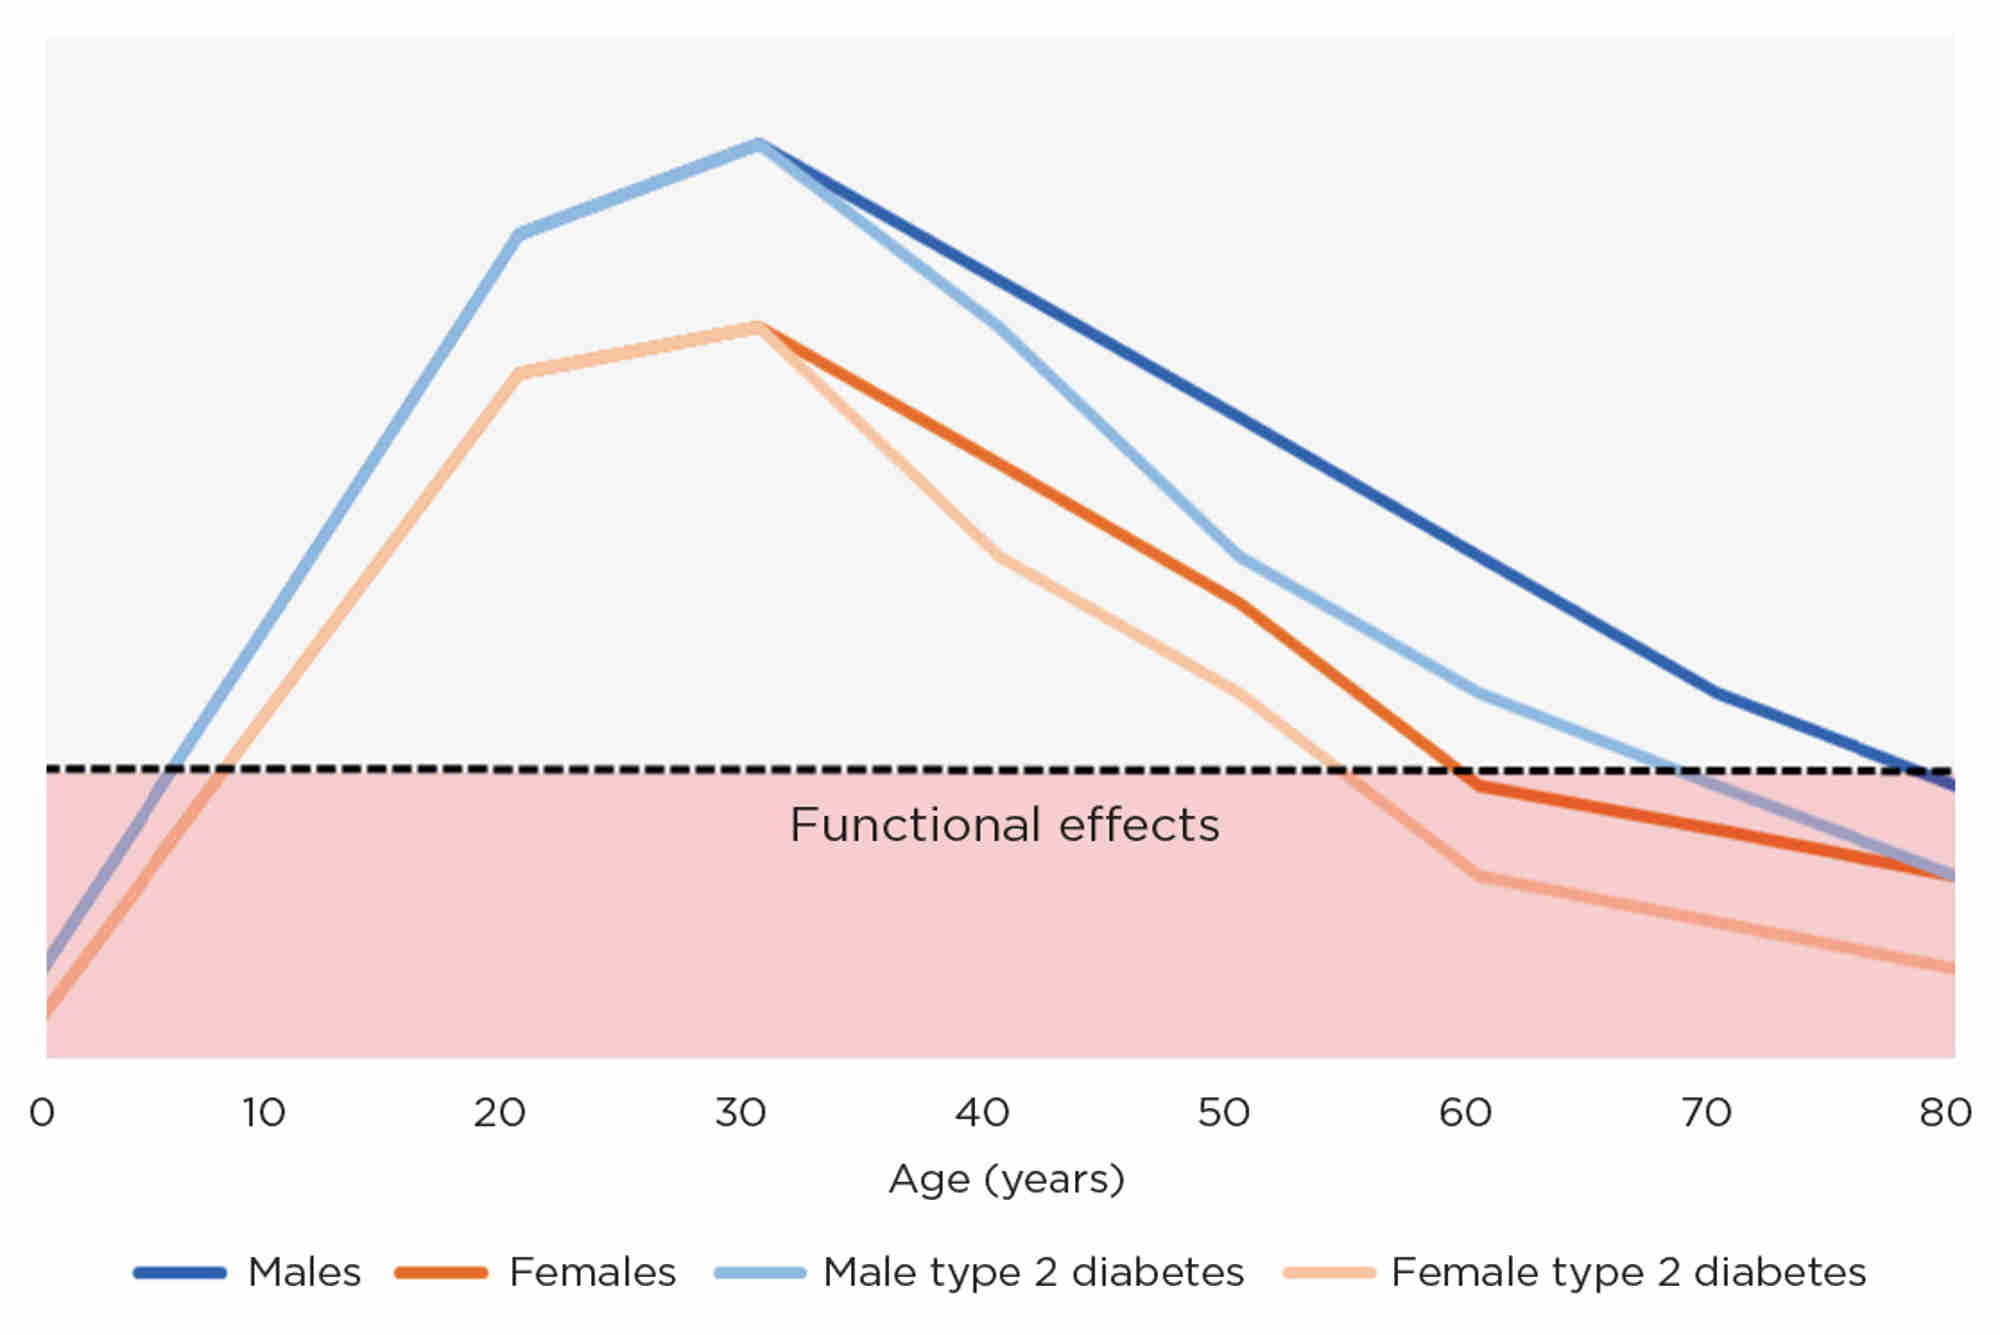 Figure 3. Representative graph displaying the expected pattern of functional changes in skeletal muscle with increasing age for patients with and without type 2 diabetes. Any value below the functional effects line would probably display in patients as poor mobility or strength.